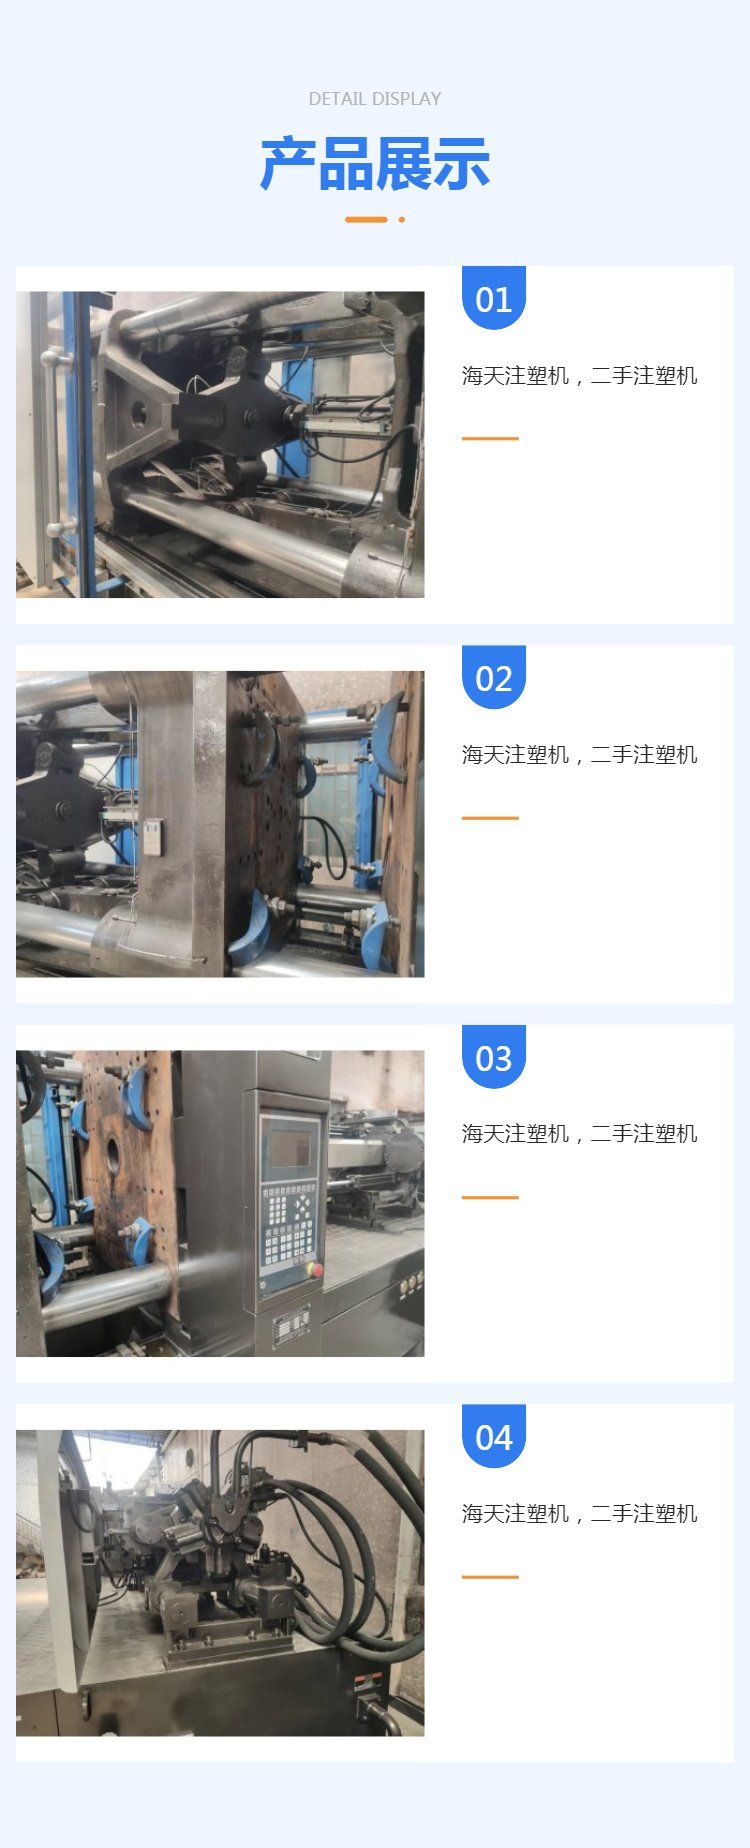 Golden Eagle second-hand injection molding machine 530T variable displacement pump rubber volume 3414 grams weight 21 tons